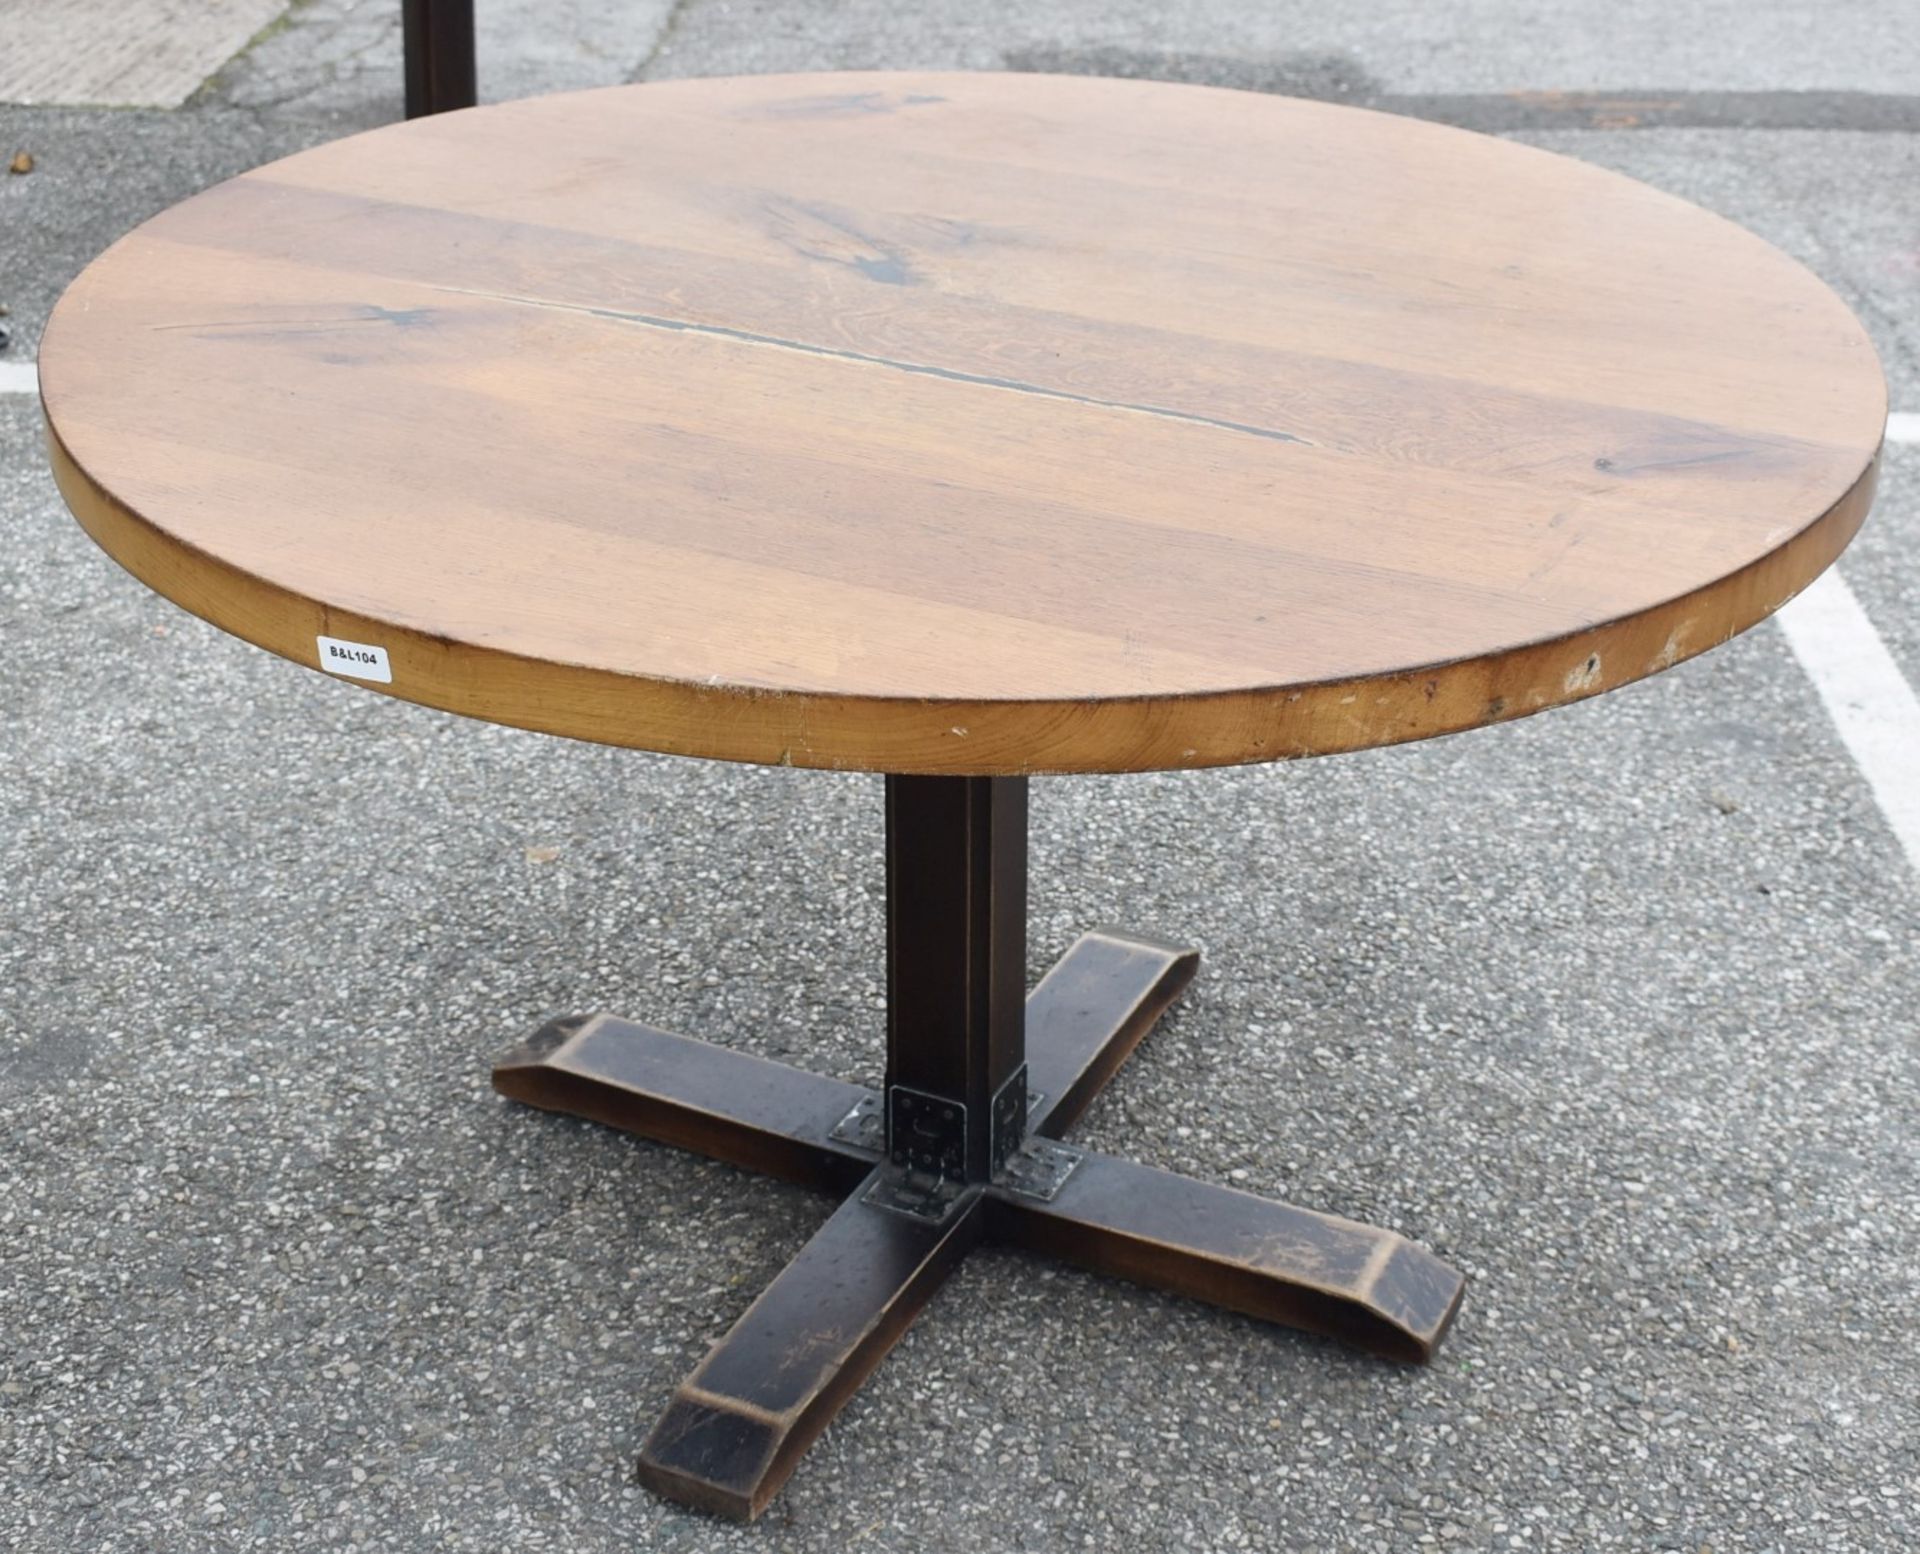 1 x Solid Oak 120cm Round Restaurant Table - Natural Rustic Knotty Oak Tops With Rustic Timber Base